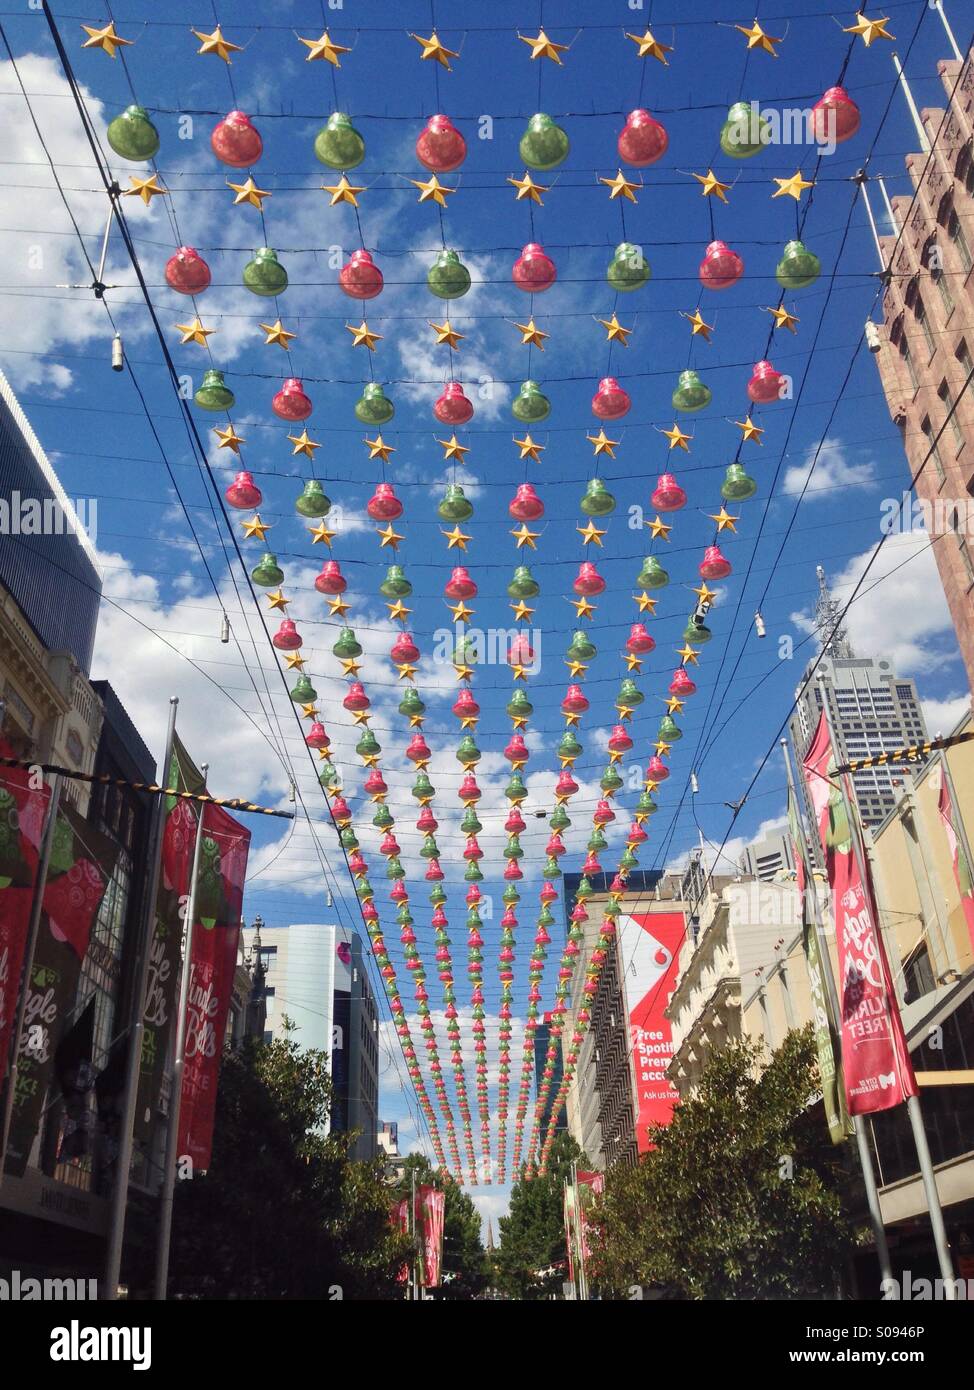 Christmas decorations in Bourke Street Mall in Melbourne, Victoria